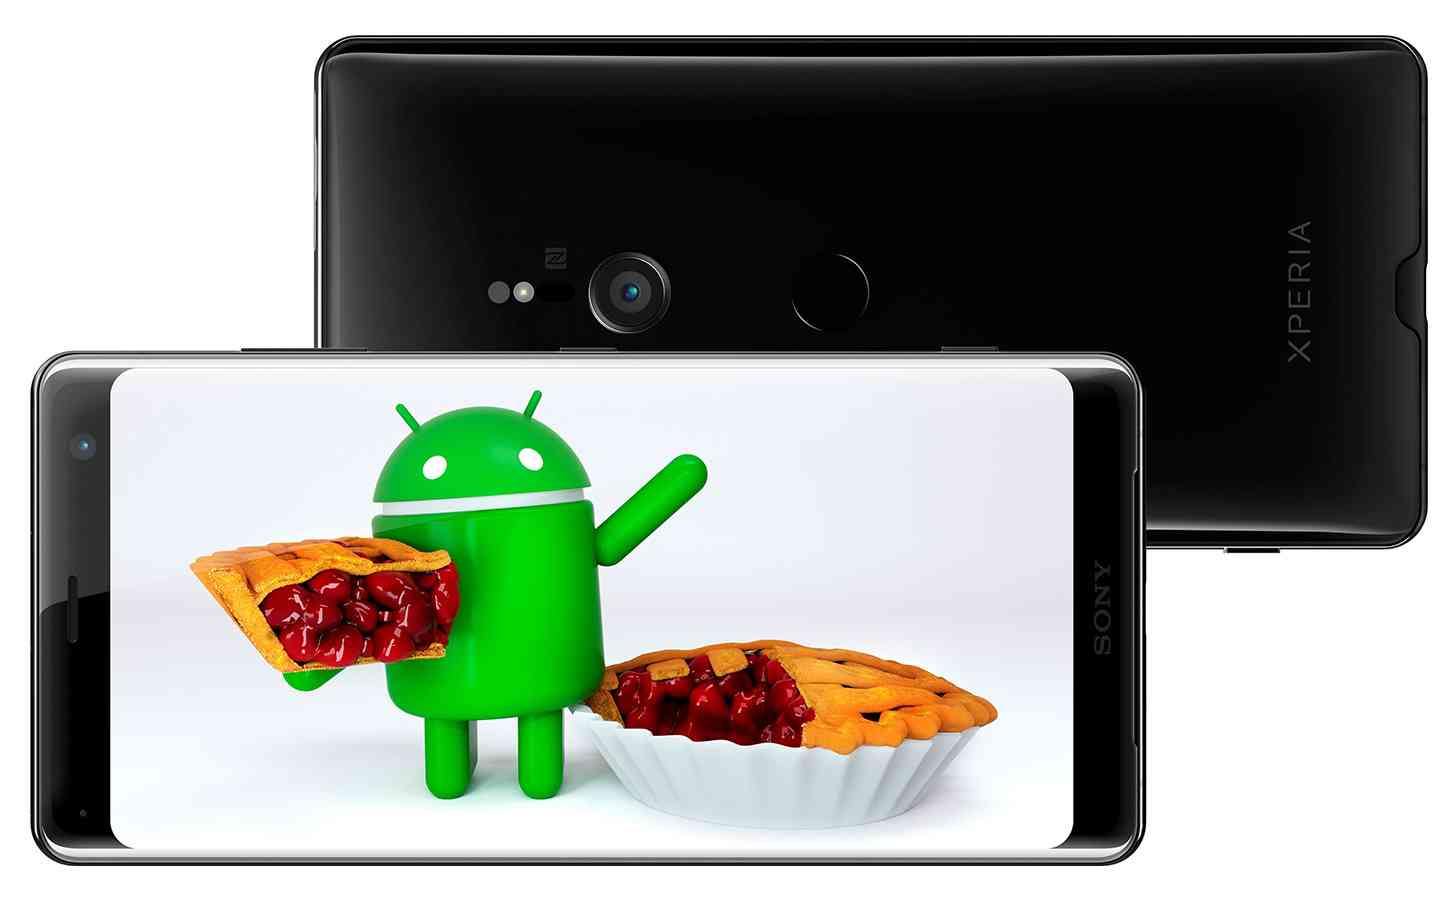 Sony Xperia Android 9 Pie update